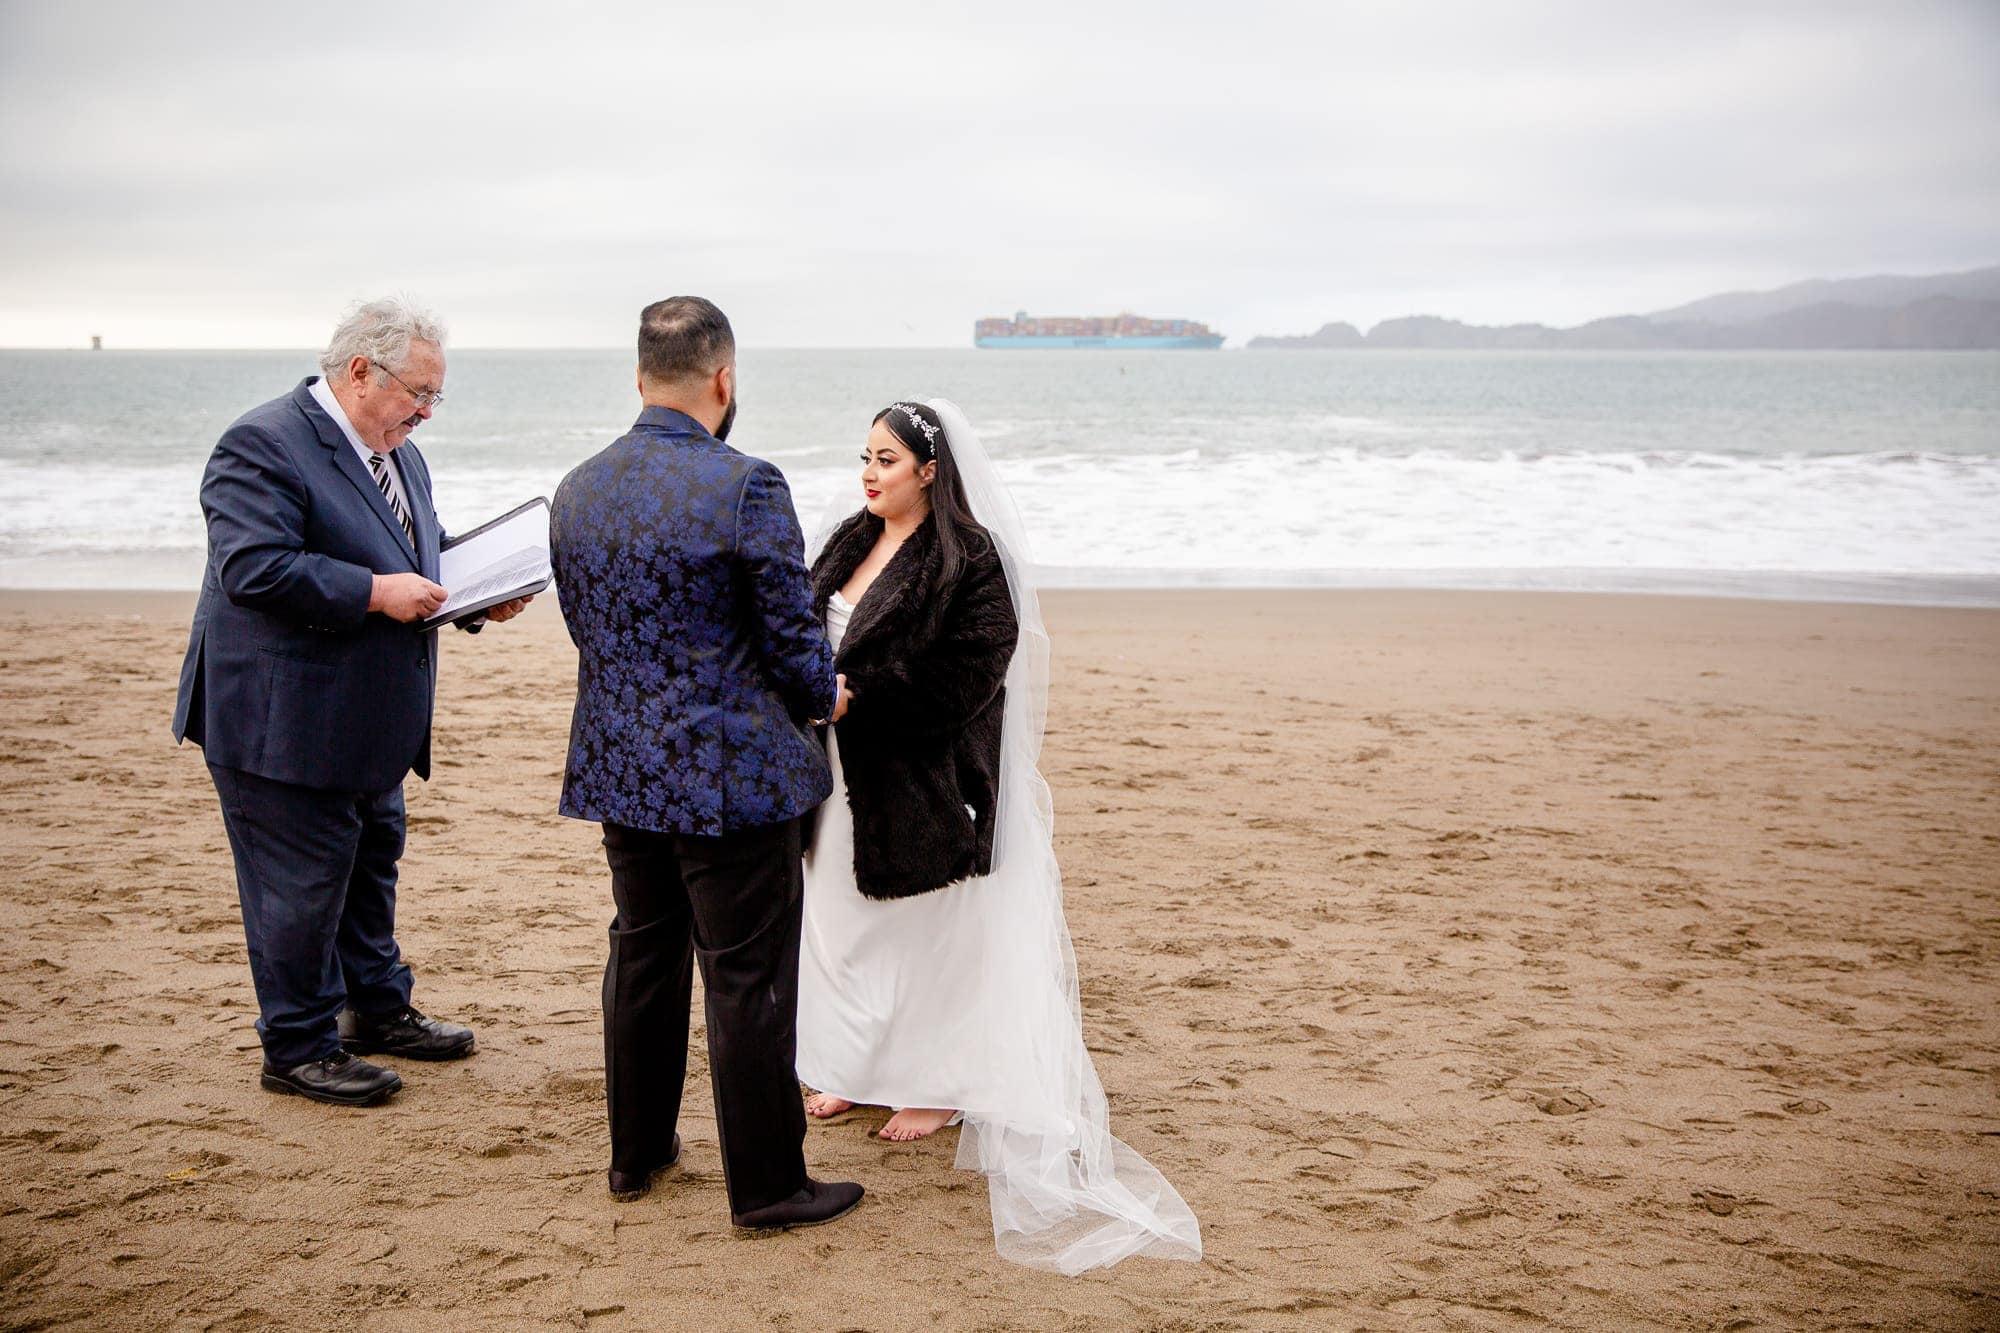 Couple and their officiant perfoming a wedding ceremony on the beach at winter